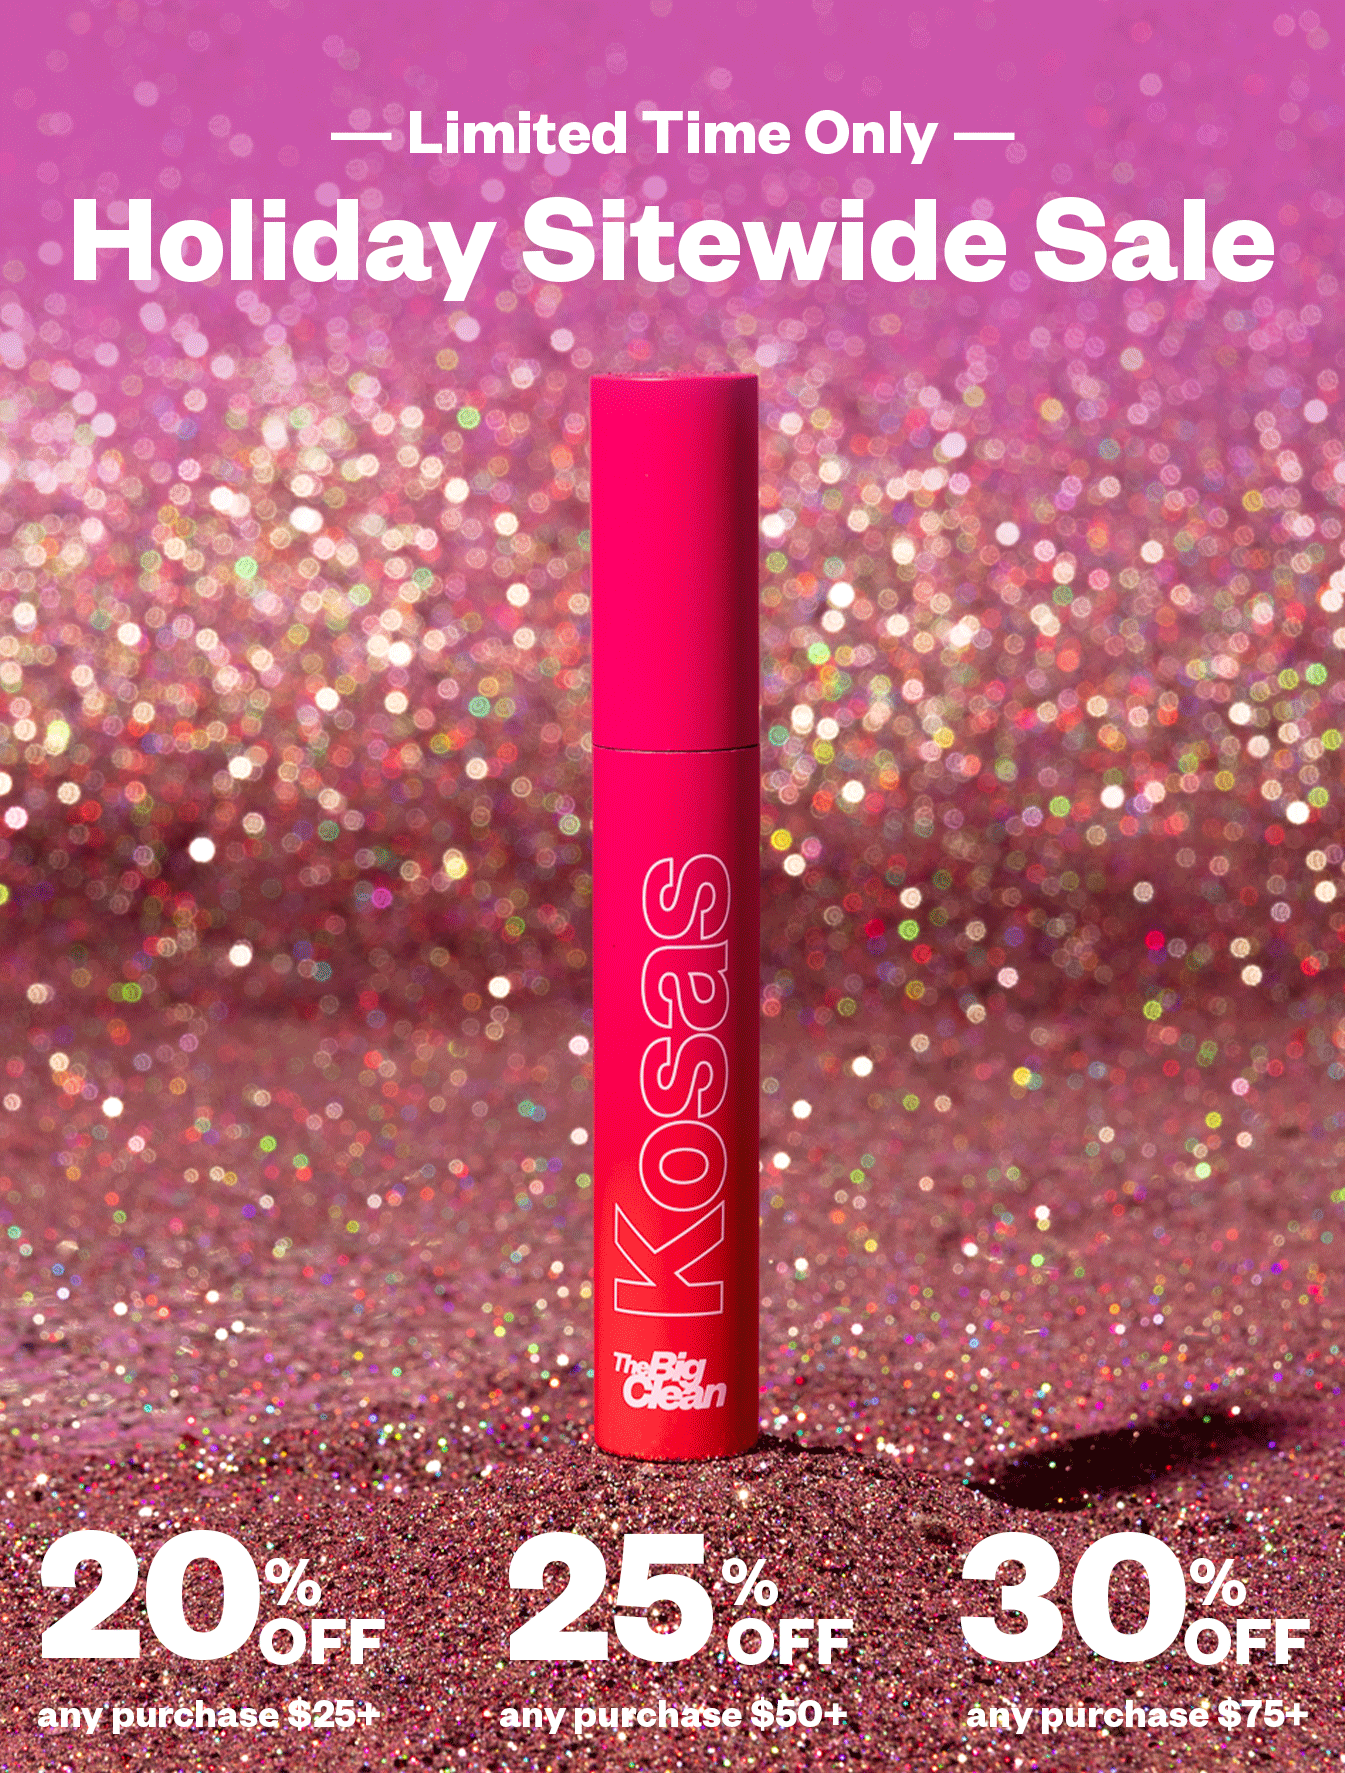 HOLIDAY SITEWIDE SALE